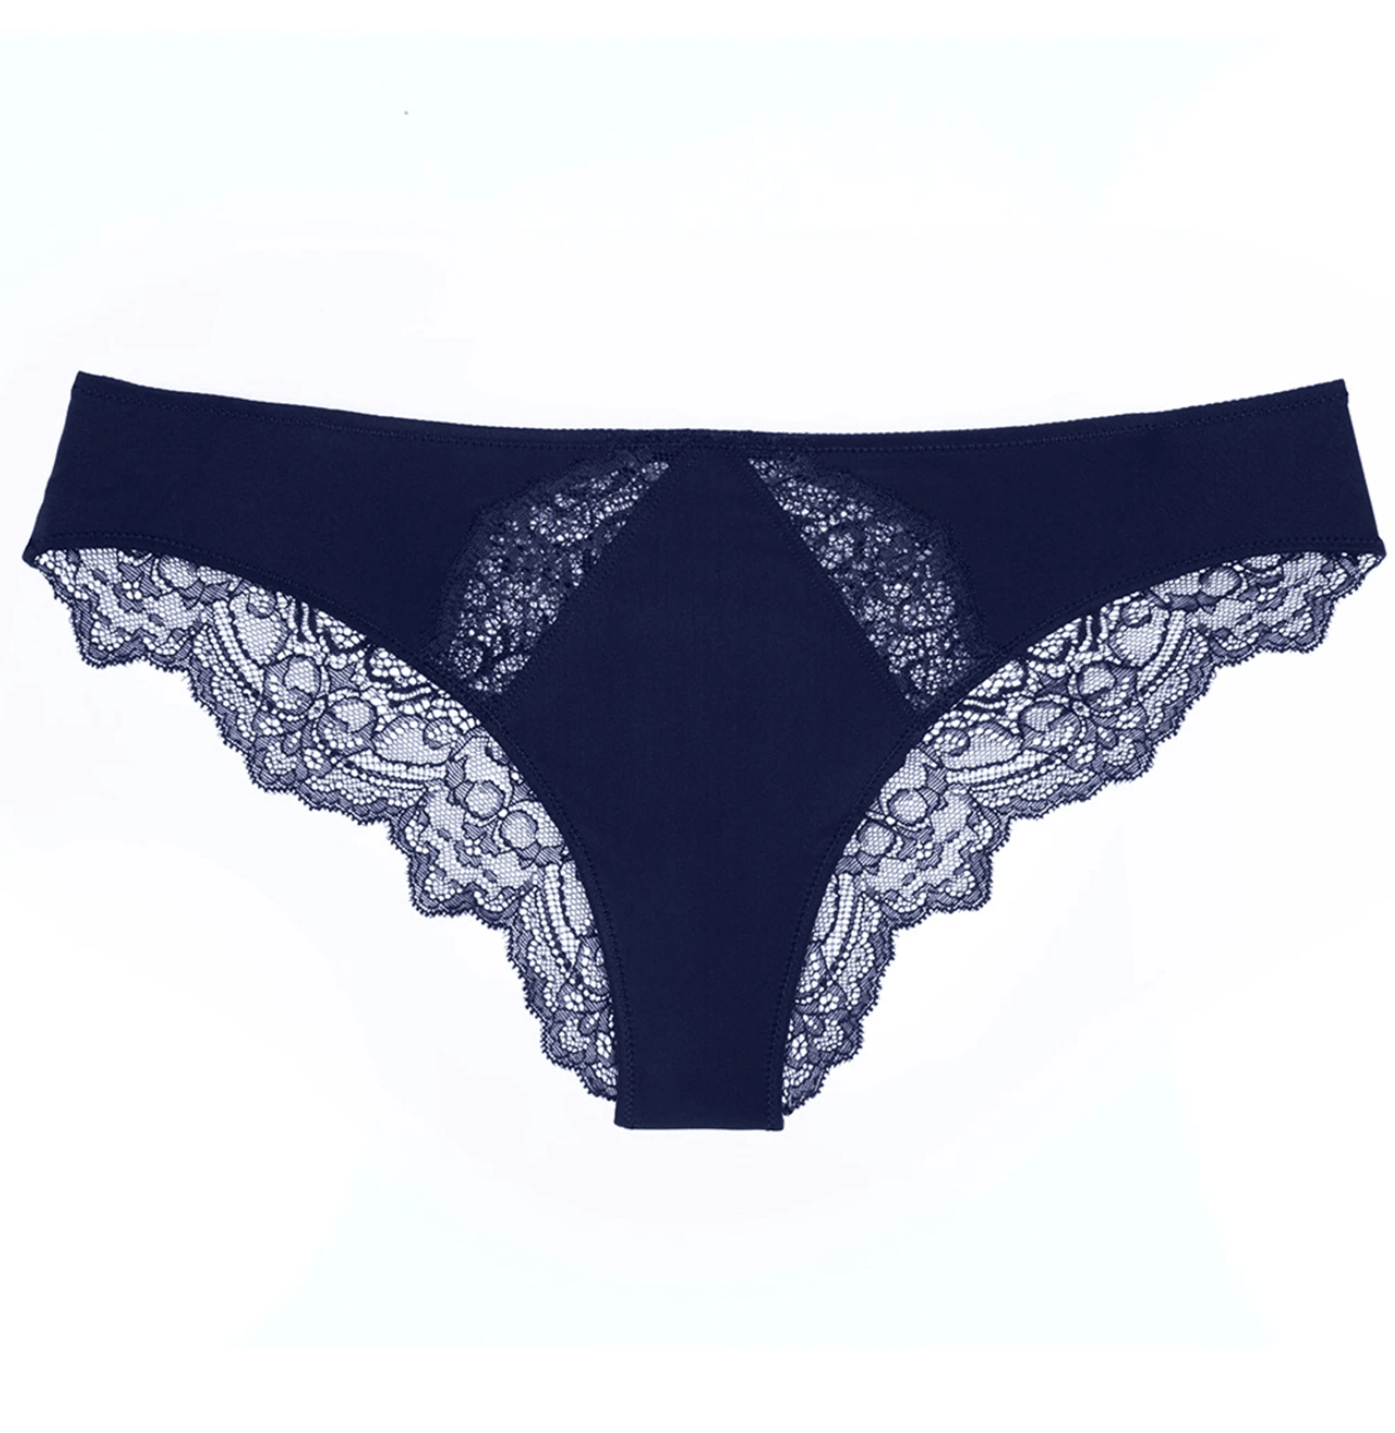 Crosby Scalloped Cheeky: Delicate Details and Timeless Design